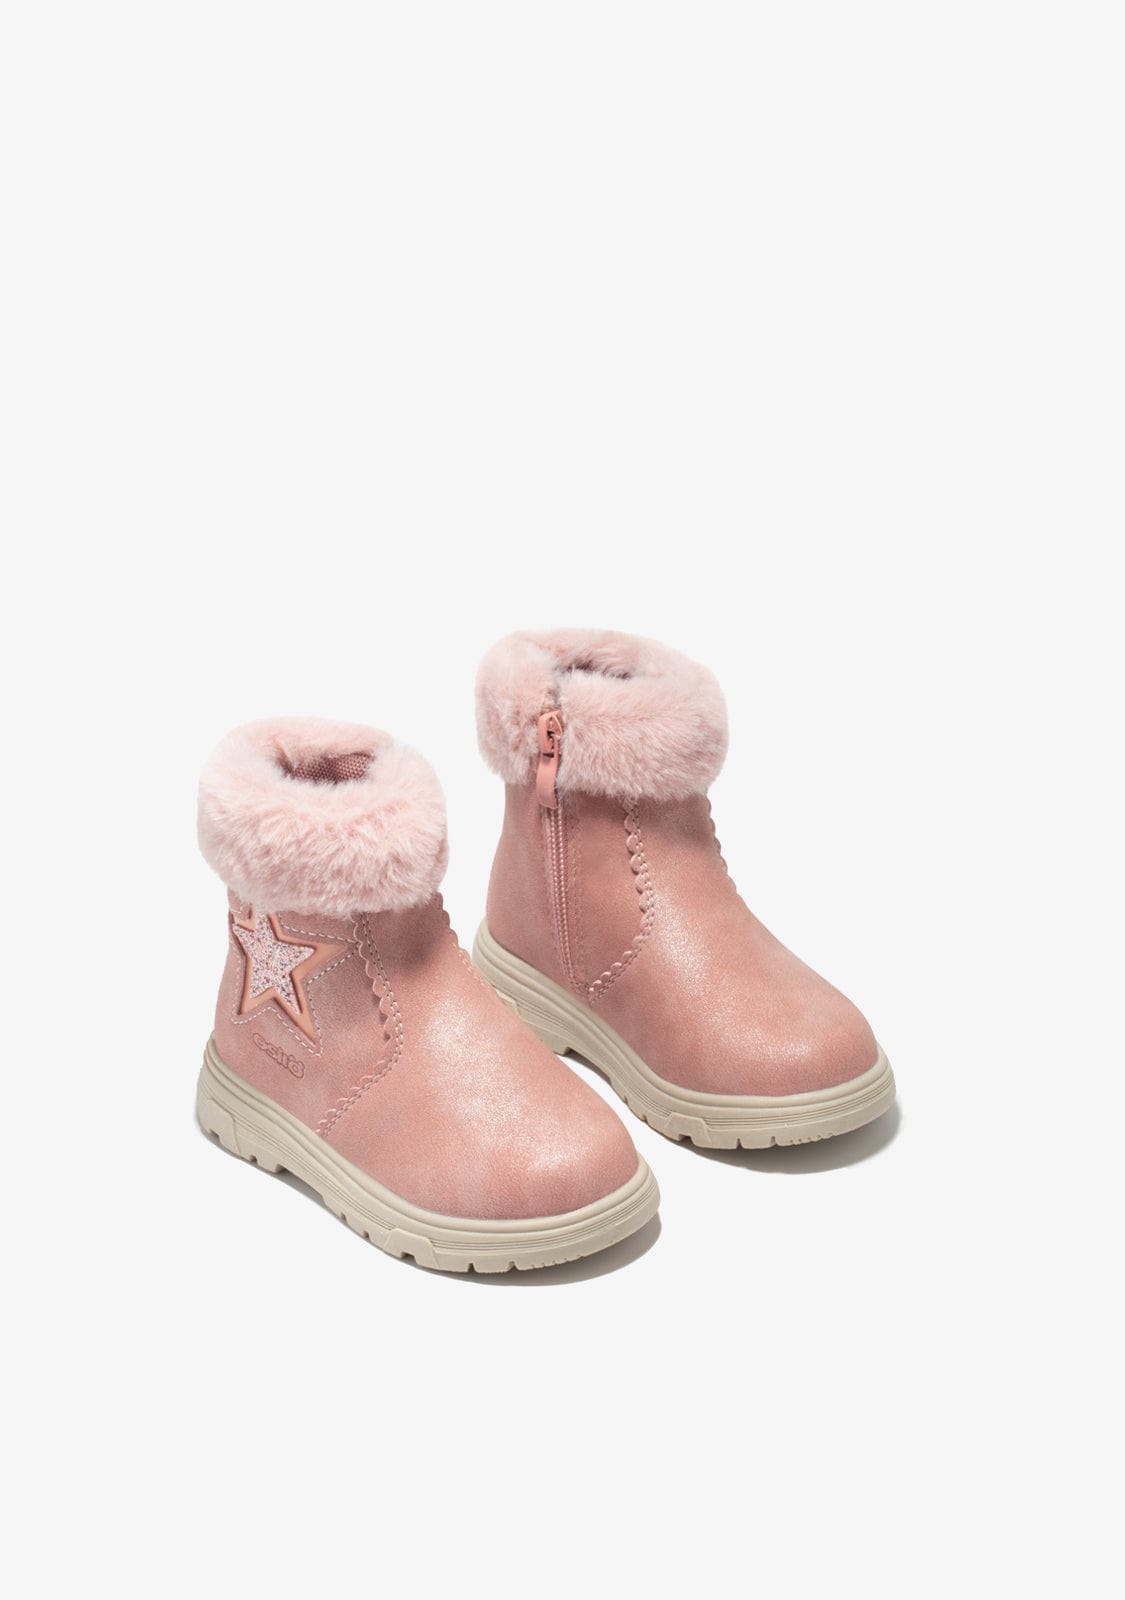 OSITO Shoes Baby's Pink Star Fur Ankle Boots